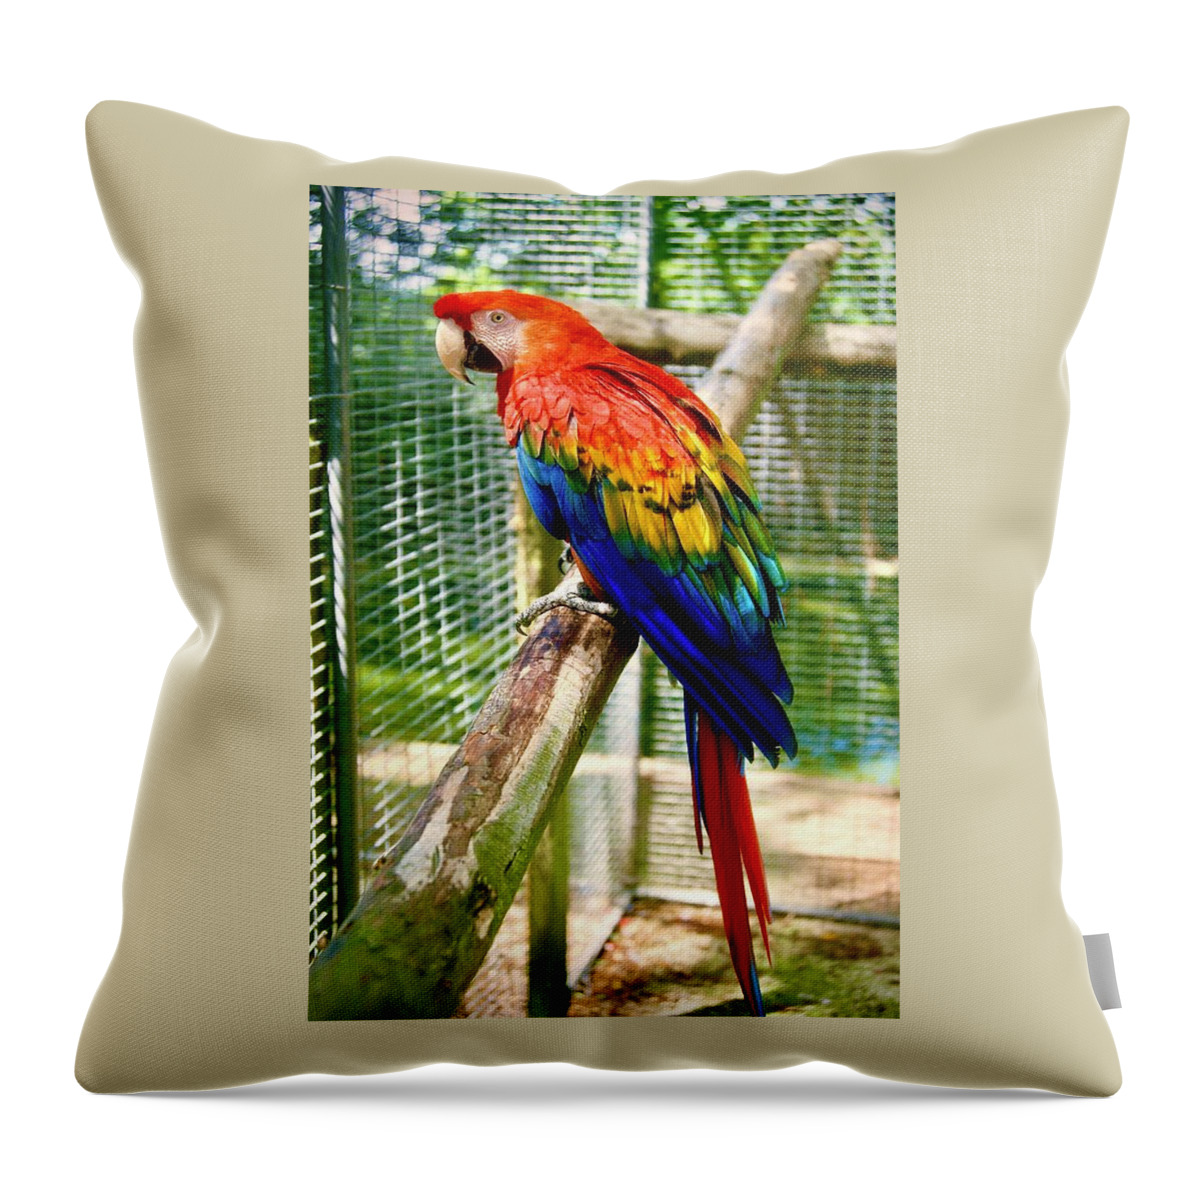  Throw Pillow featuring the photograph Scarlet Macaw by Gordon James